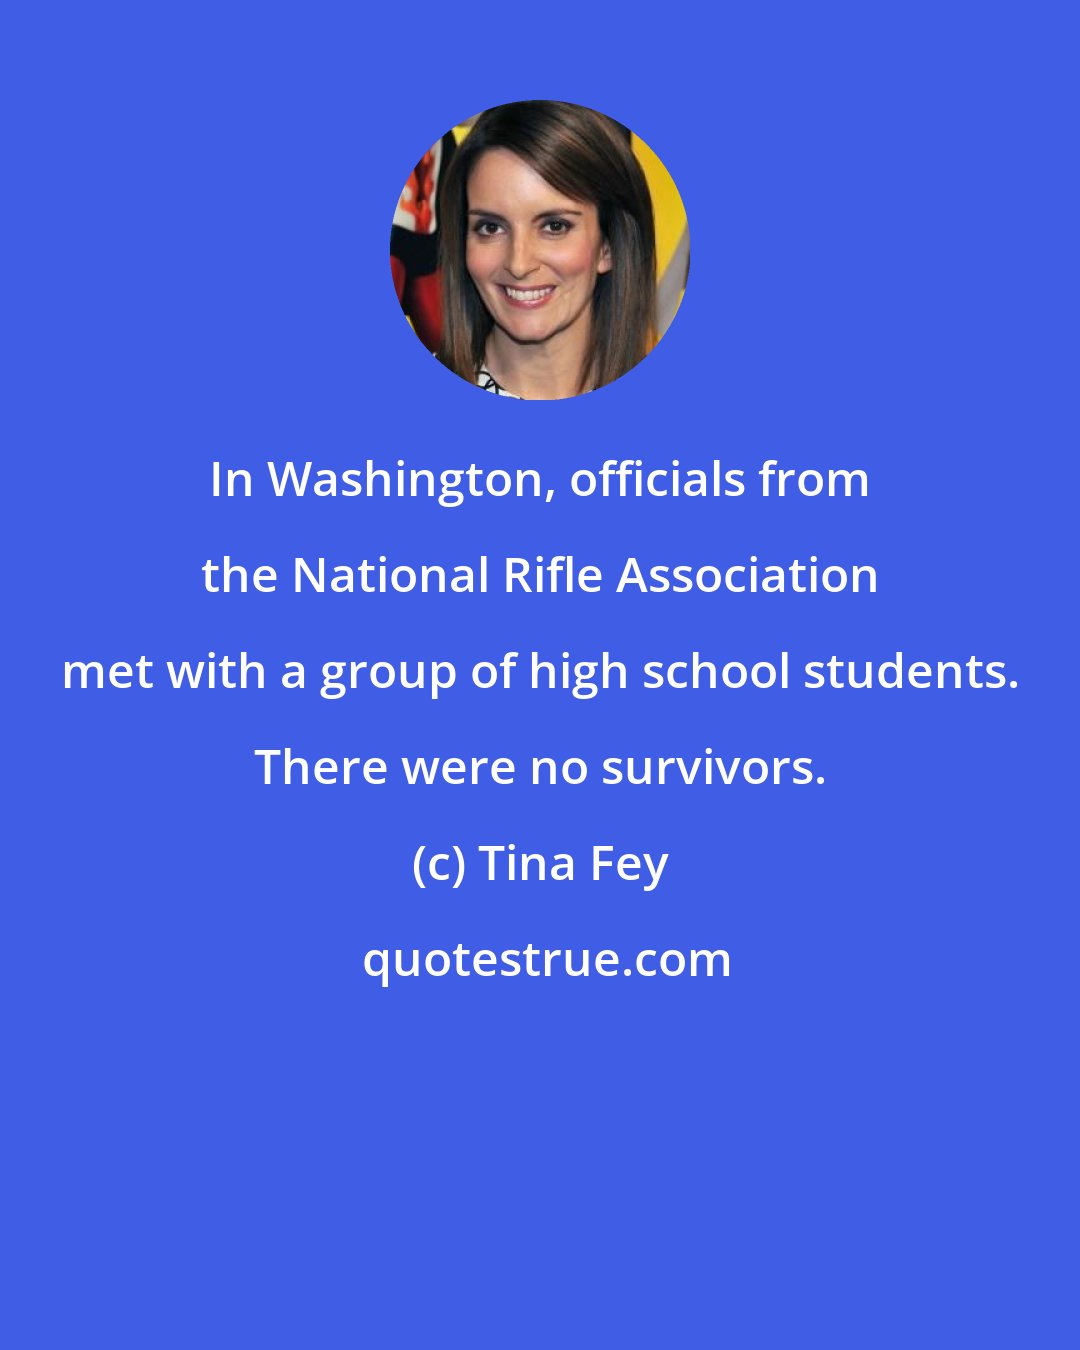 Tina Fey: In Washington, officials from the National Rifle Association met with a group of high school students. There were no survivors.